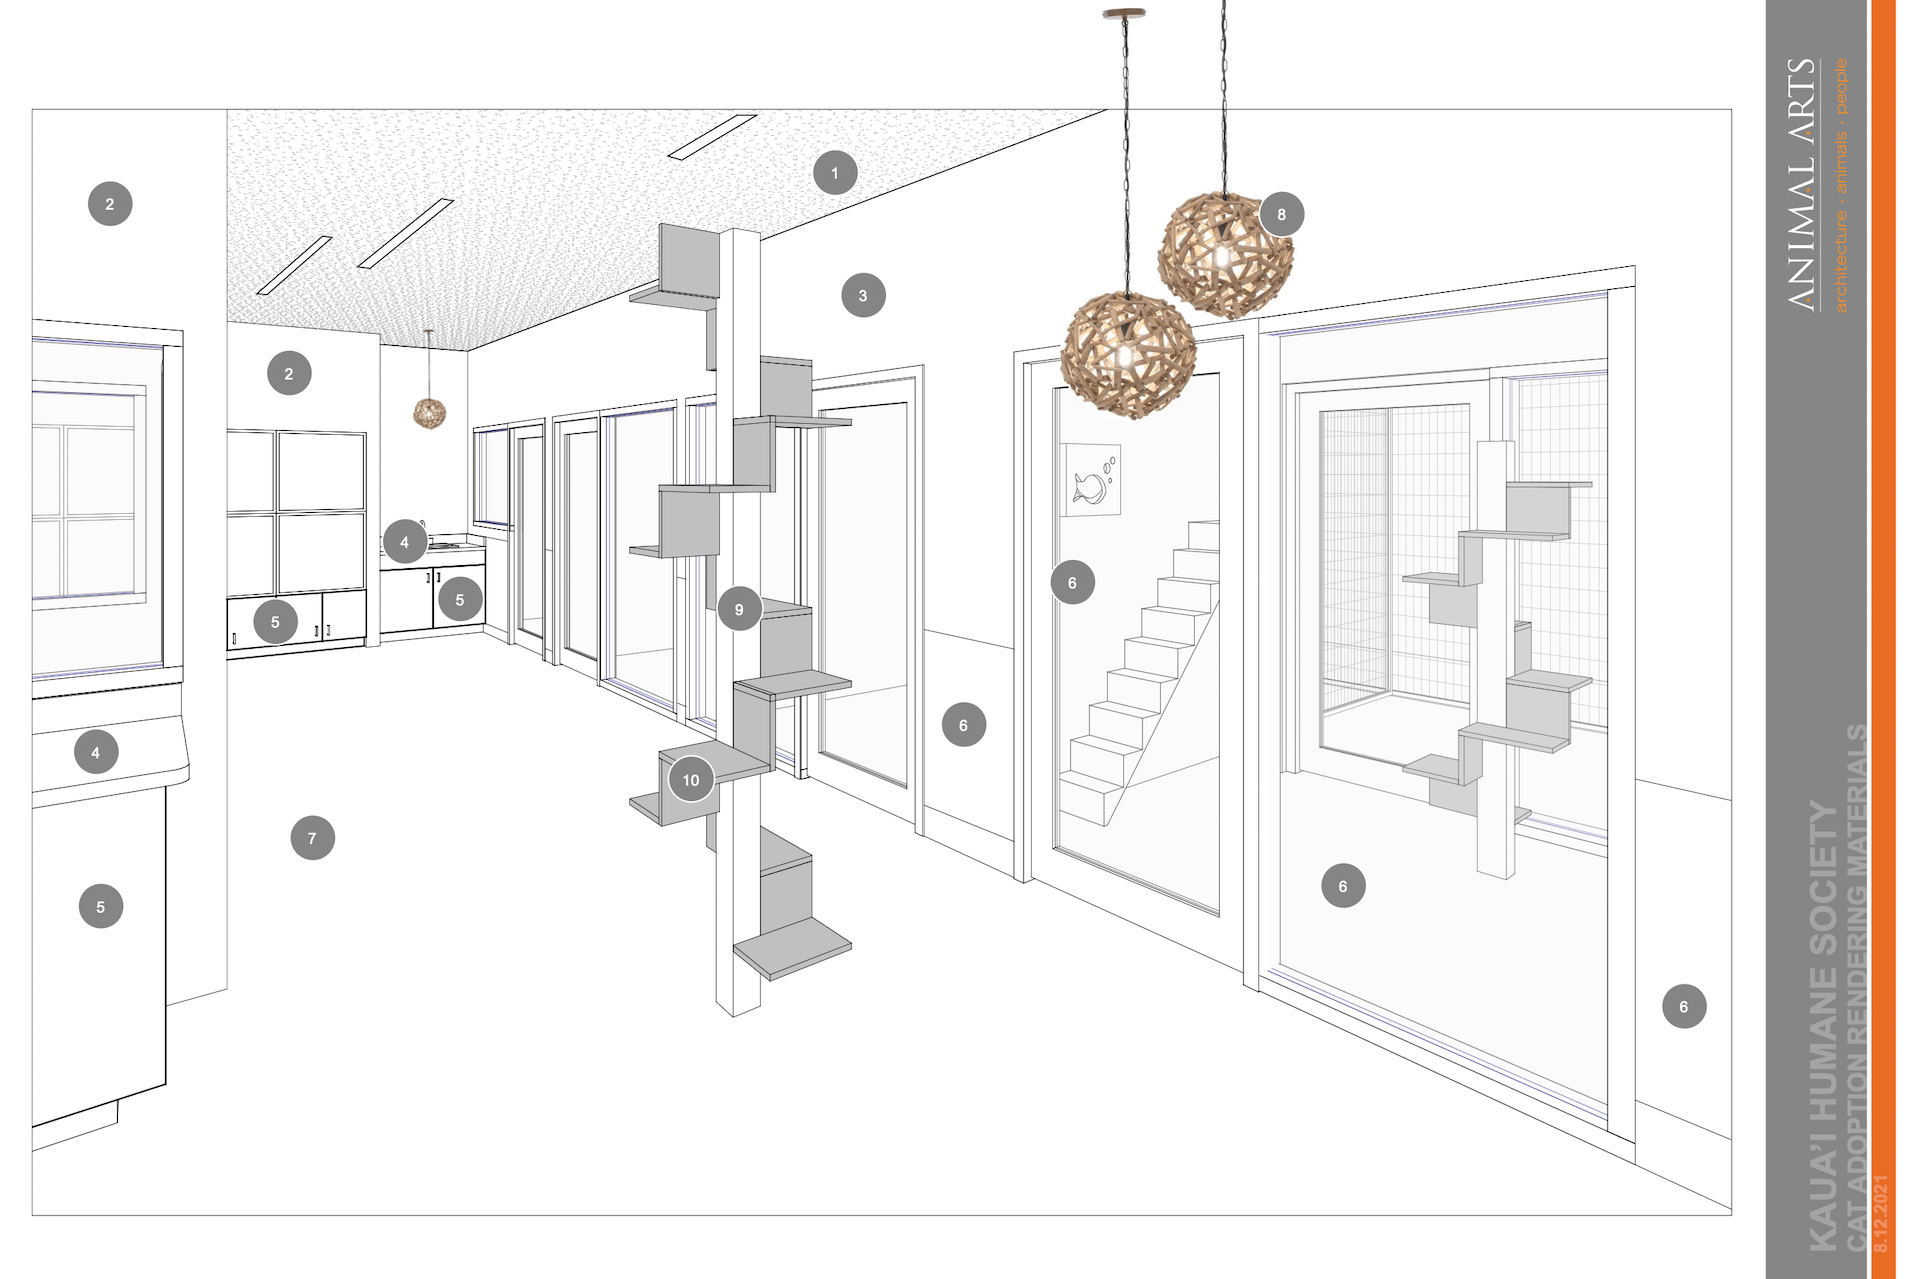 Materials Specification for Cat Adoption Area Visualization